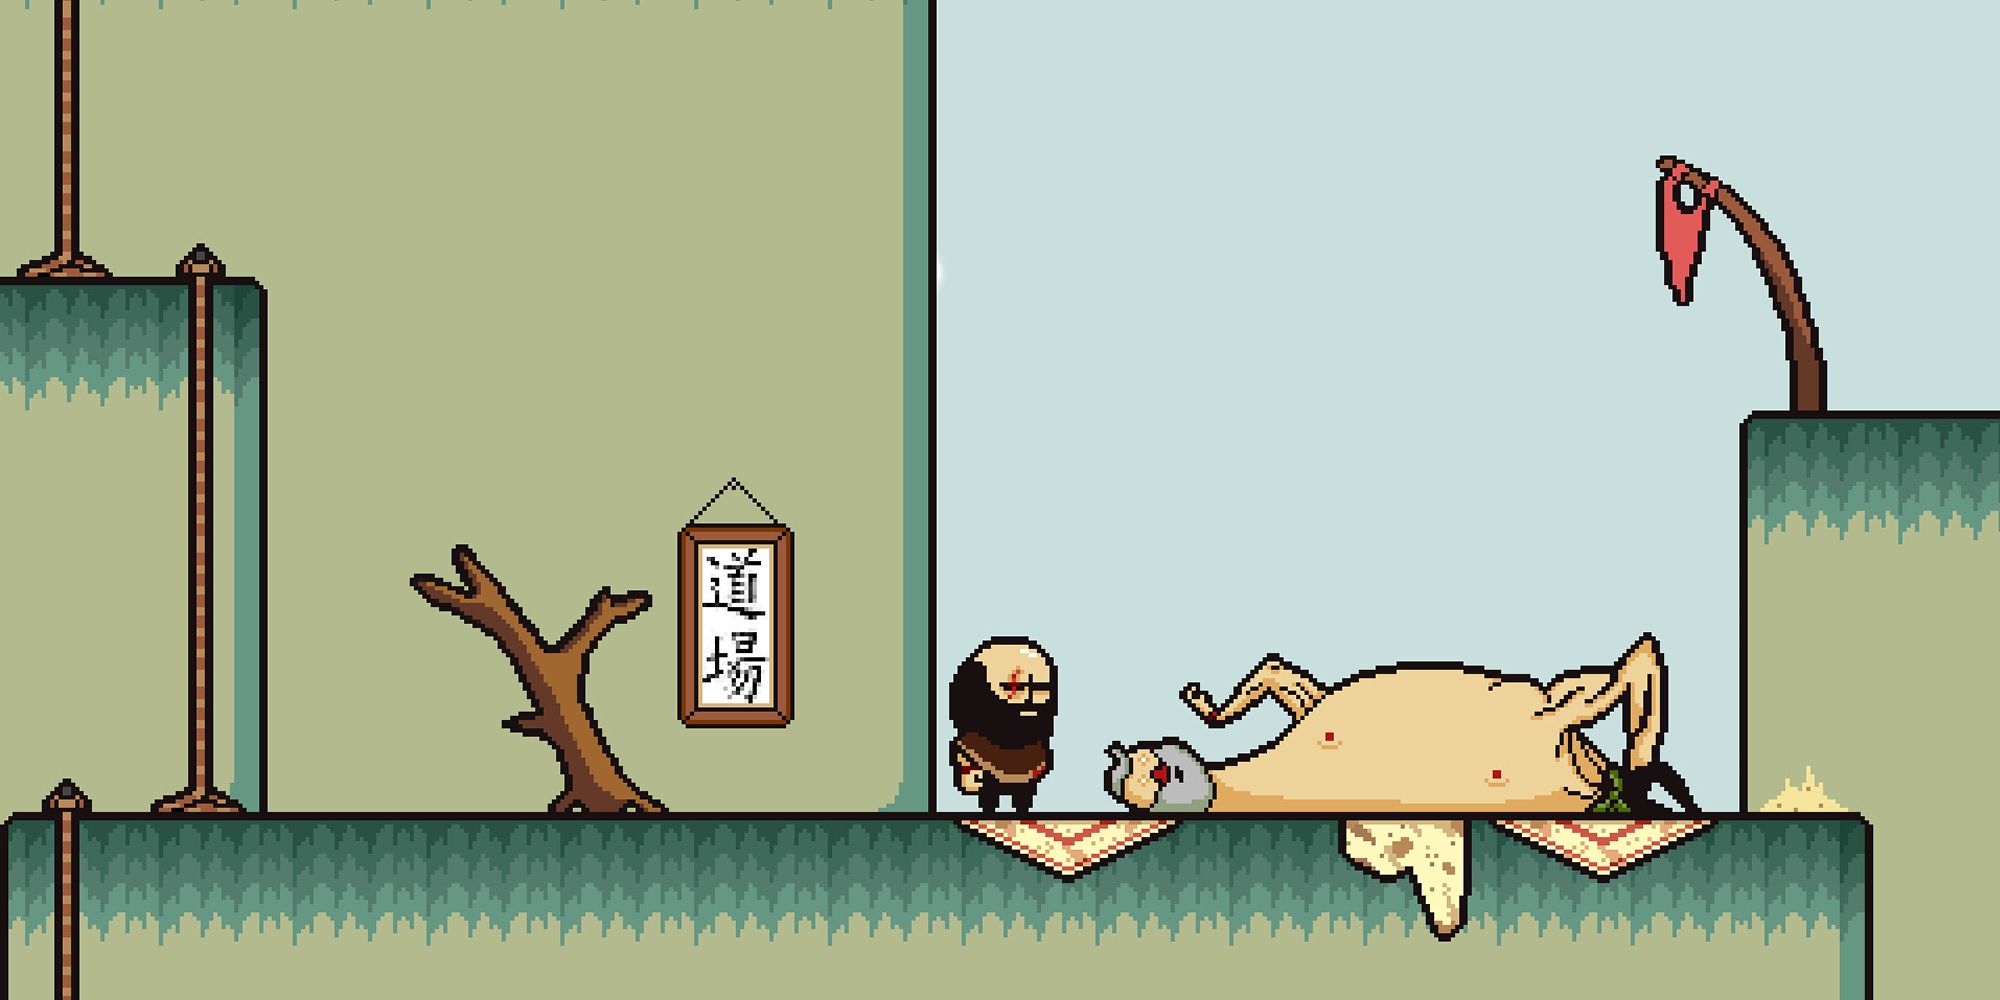 Lisa The Painful Steam Brad Approaches A Joy Mutant